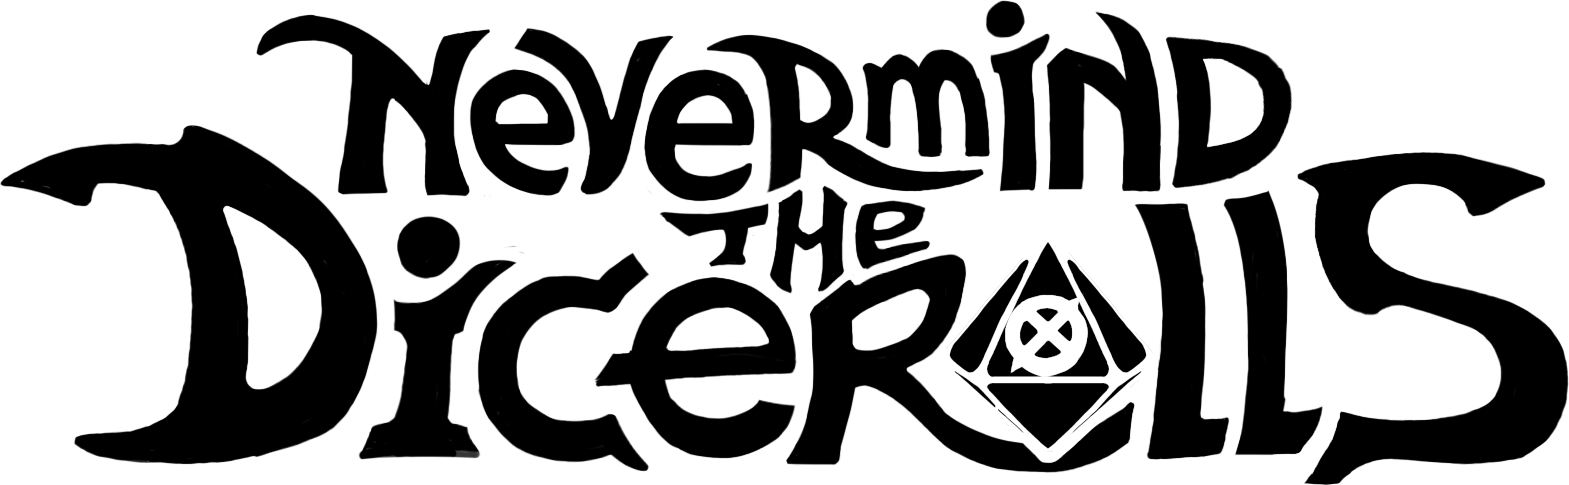 The Never Mind the Dice Rolls logo in black